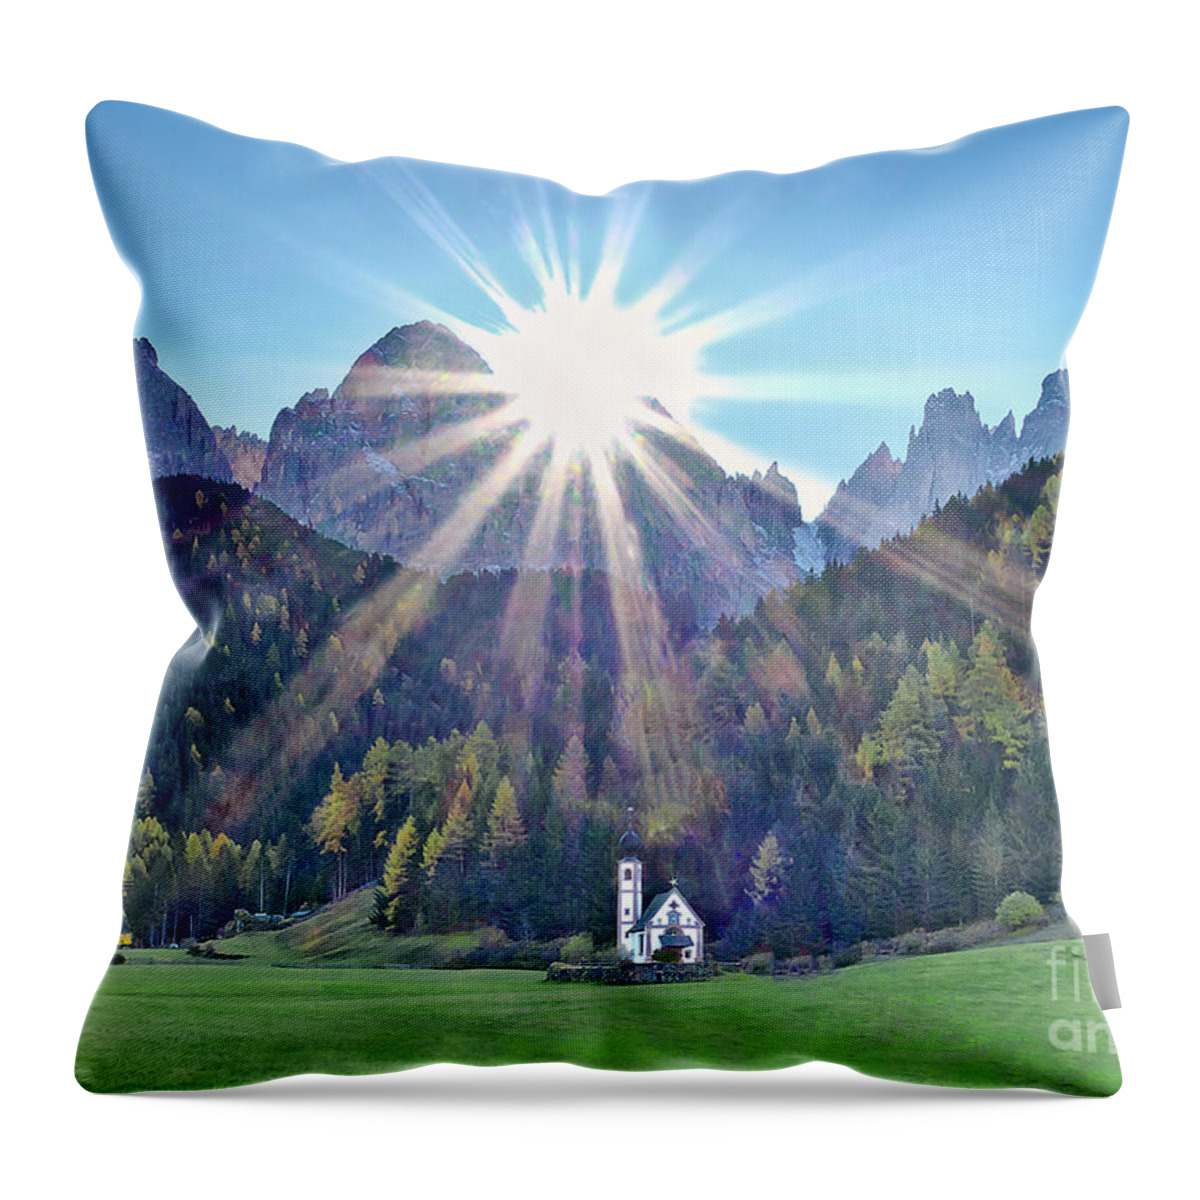 Sunrise Sun Rays Glory Black Mountains Powerful Striking Sunlight Sky Dramatic Beautiful Stunning Magnificent Exciting Landscape Contemporary Serenity Inspirational Serene Stylish Magic Poetic Exceptional Singular Electric Stimulating Thrilling Atmospheric Aesthetic Attractive Radiant Expressive Expression Alluring Scenic Sensational Appealing Brilliant Captivating Fascinating Glamorous Glorious Spectacular Splendid Simplicity Solo Solitary Evocative White Church Vivid Color Dolomites Italy Alps Throw Pillow featuring the photograph Sunrise glory NEW DAY IS RISING DolomItes Italy, St Johann Church, Val di Funes by Tatiana Bogracheva